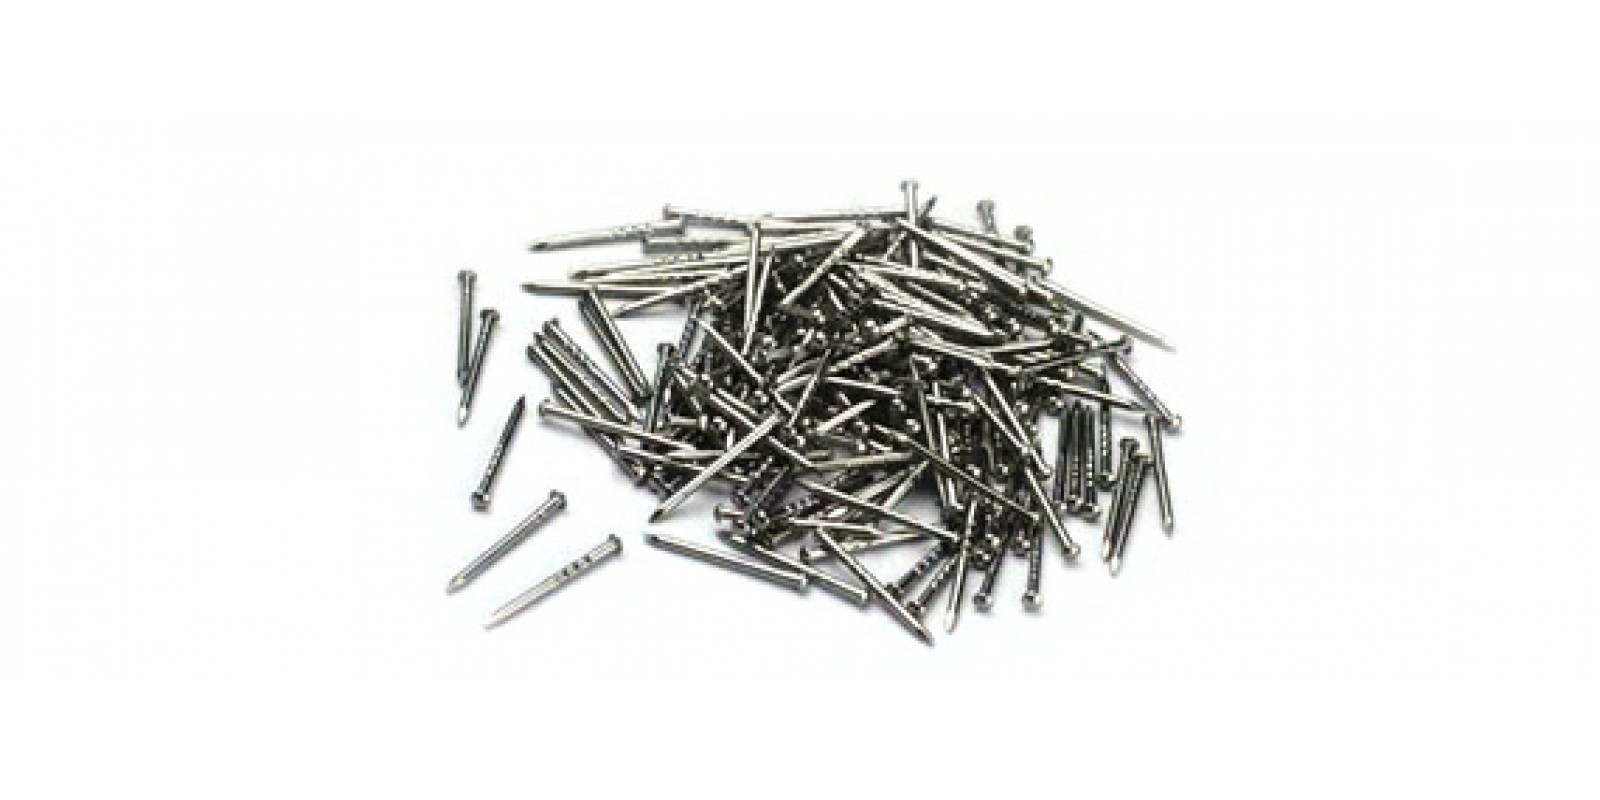 PI55299 Track nails, about 400 pieces